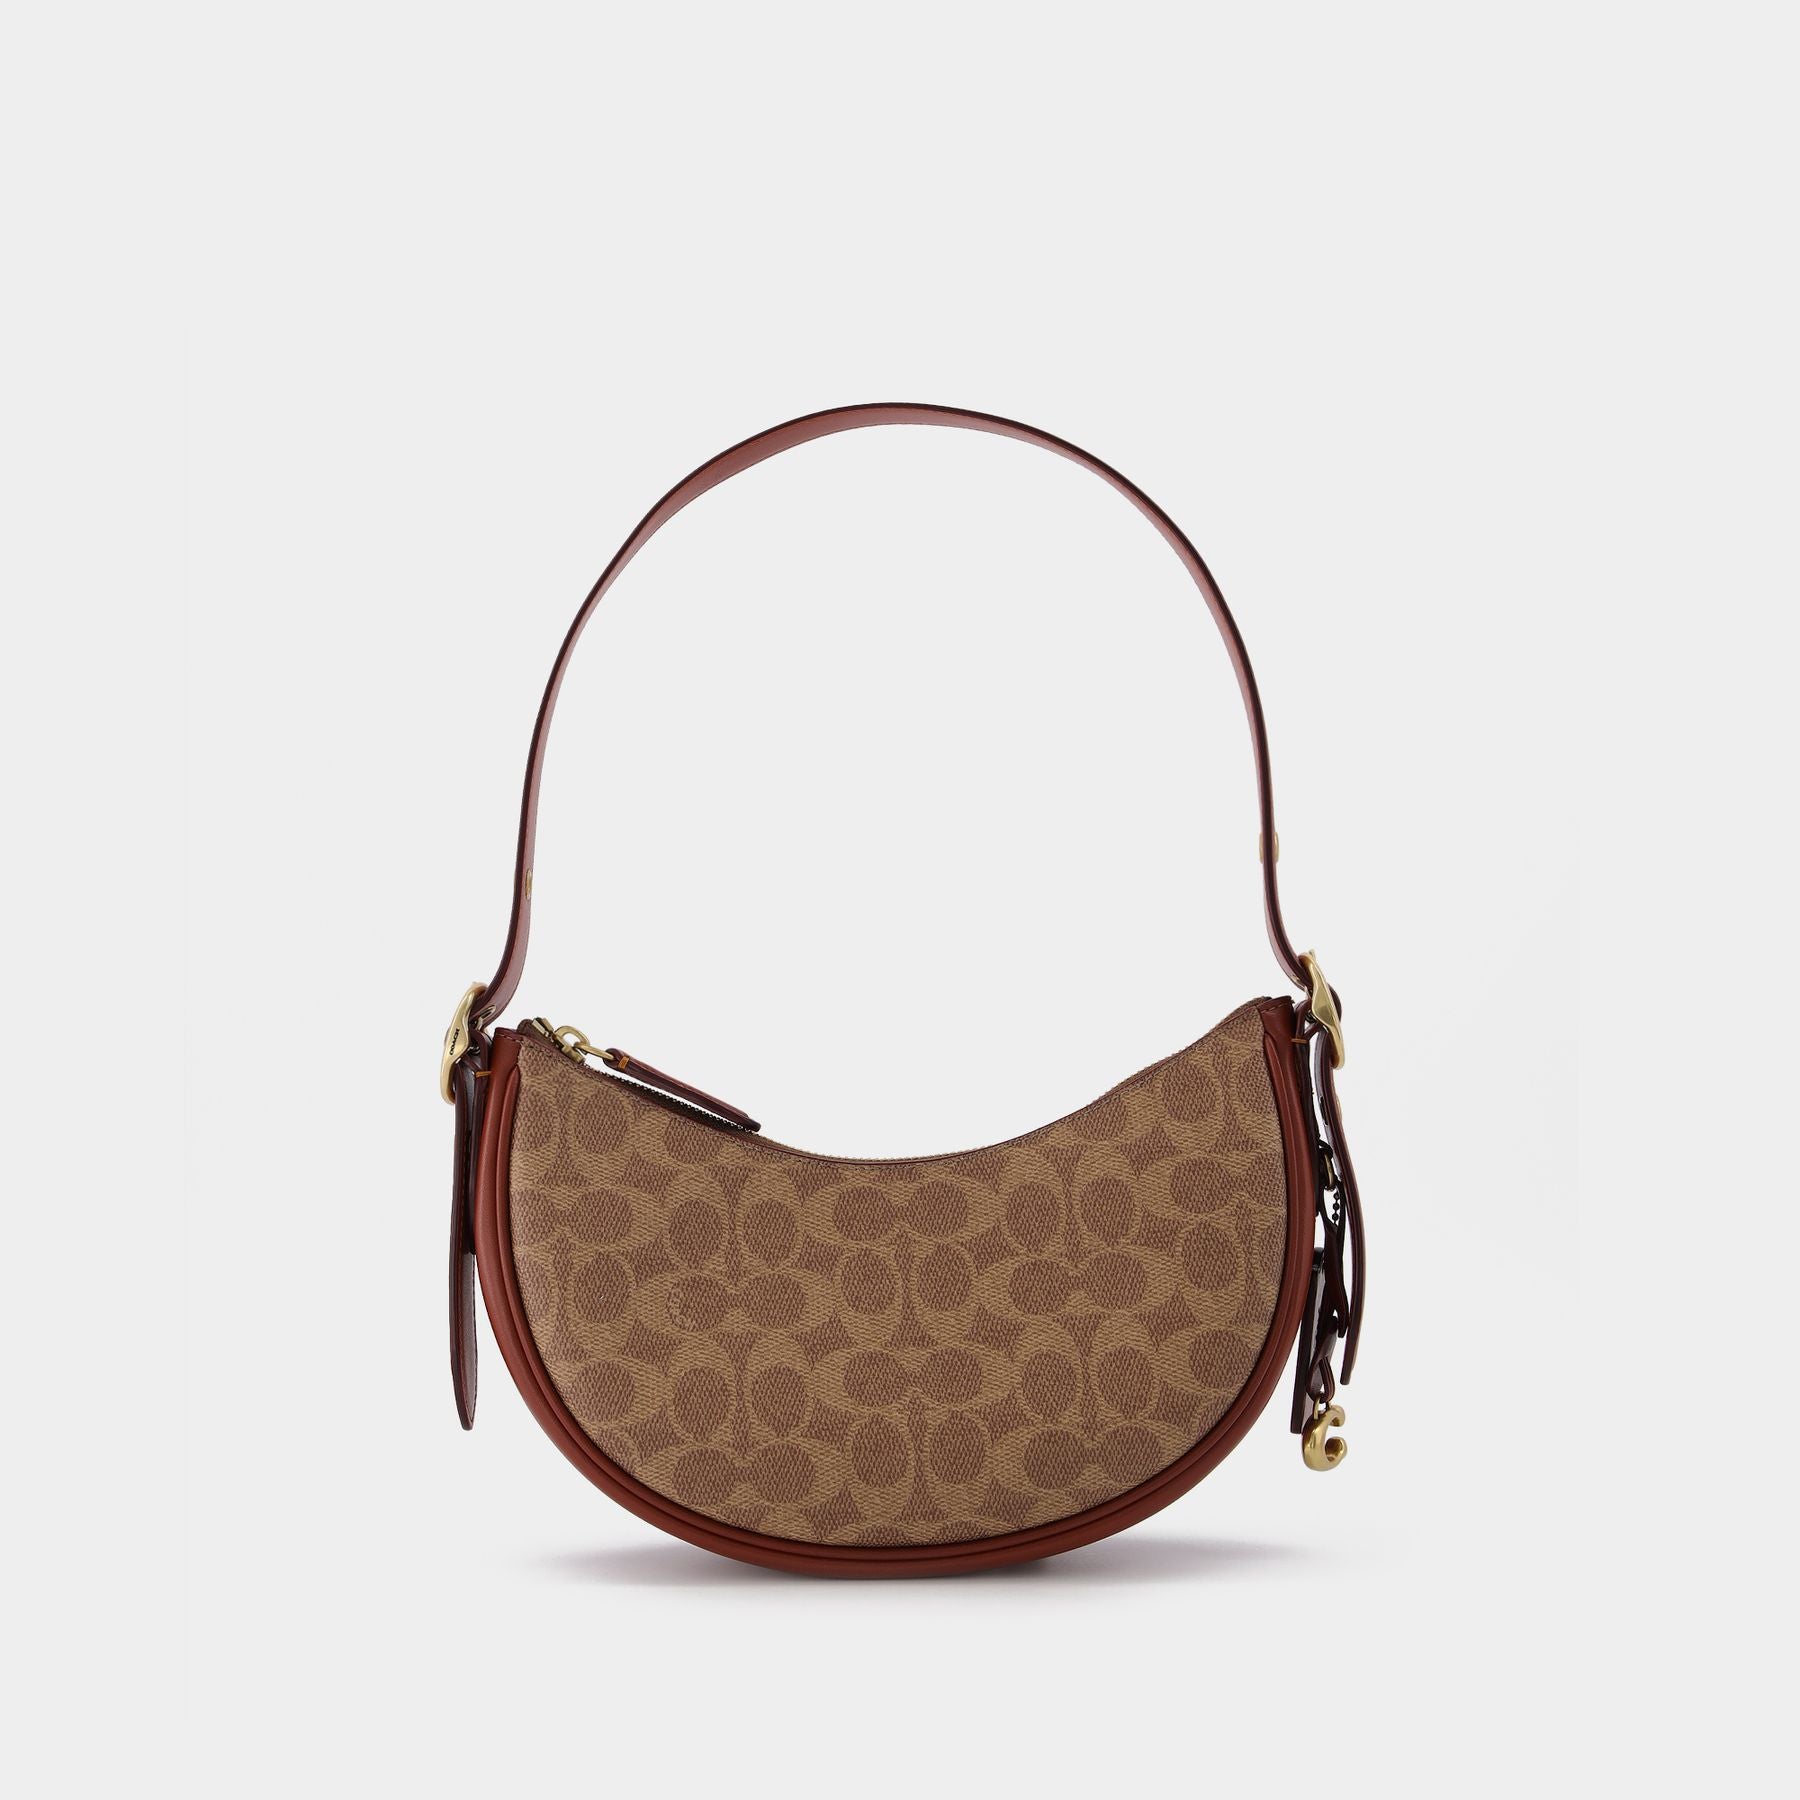 Coach Sutton Hobo Bag in Signature & Saddle Brown Leather